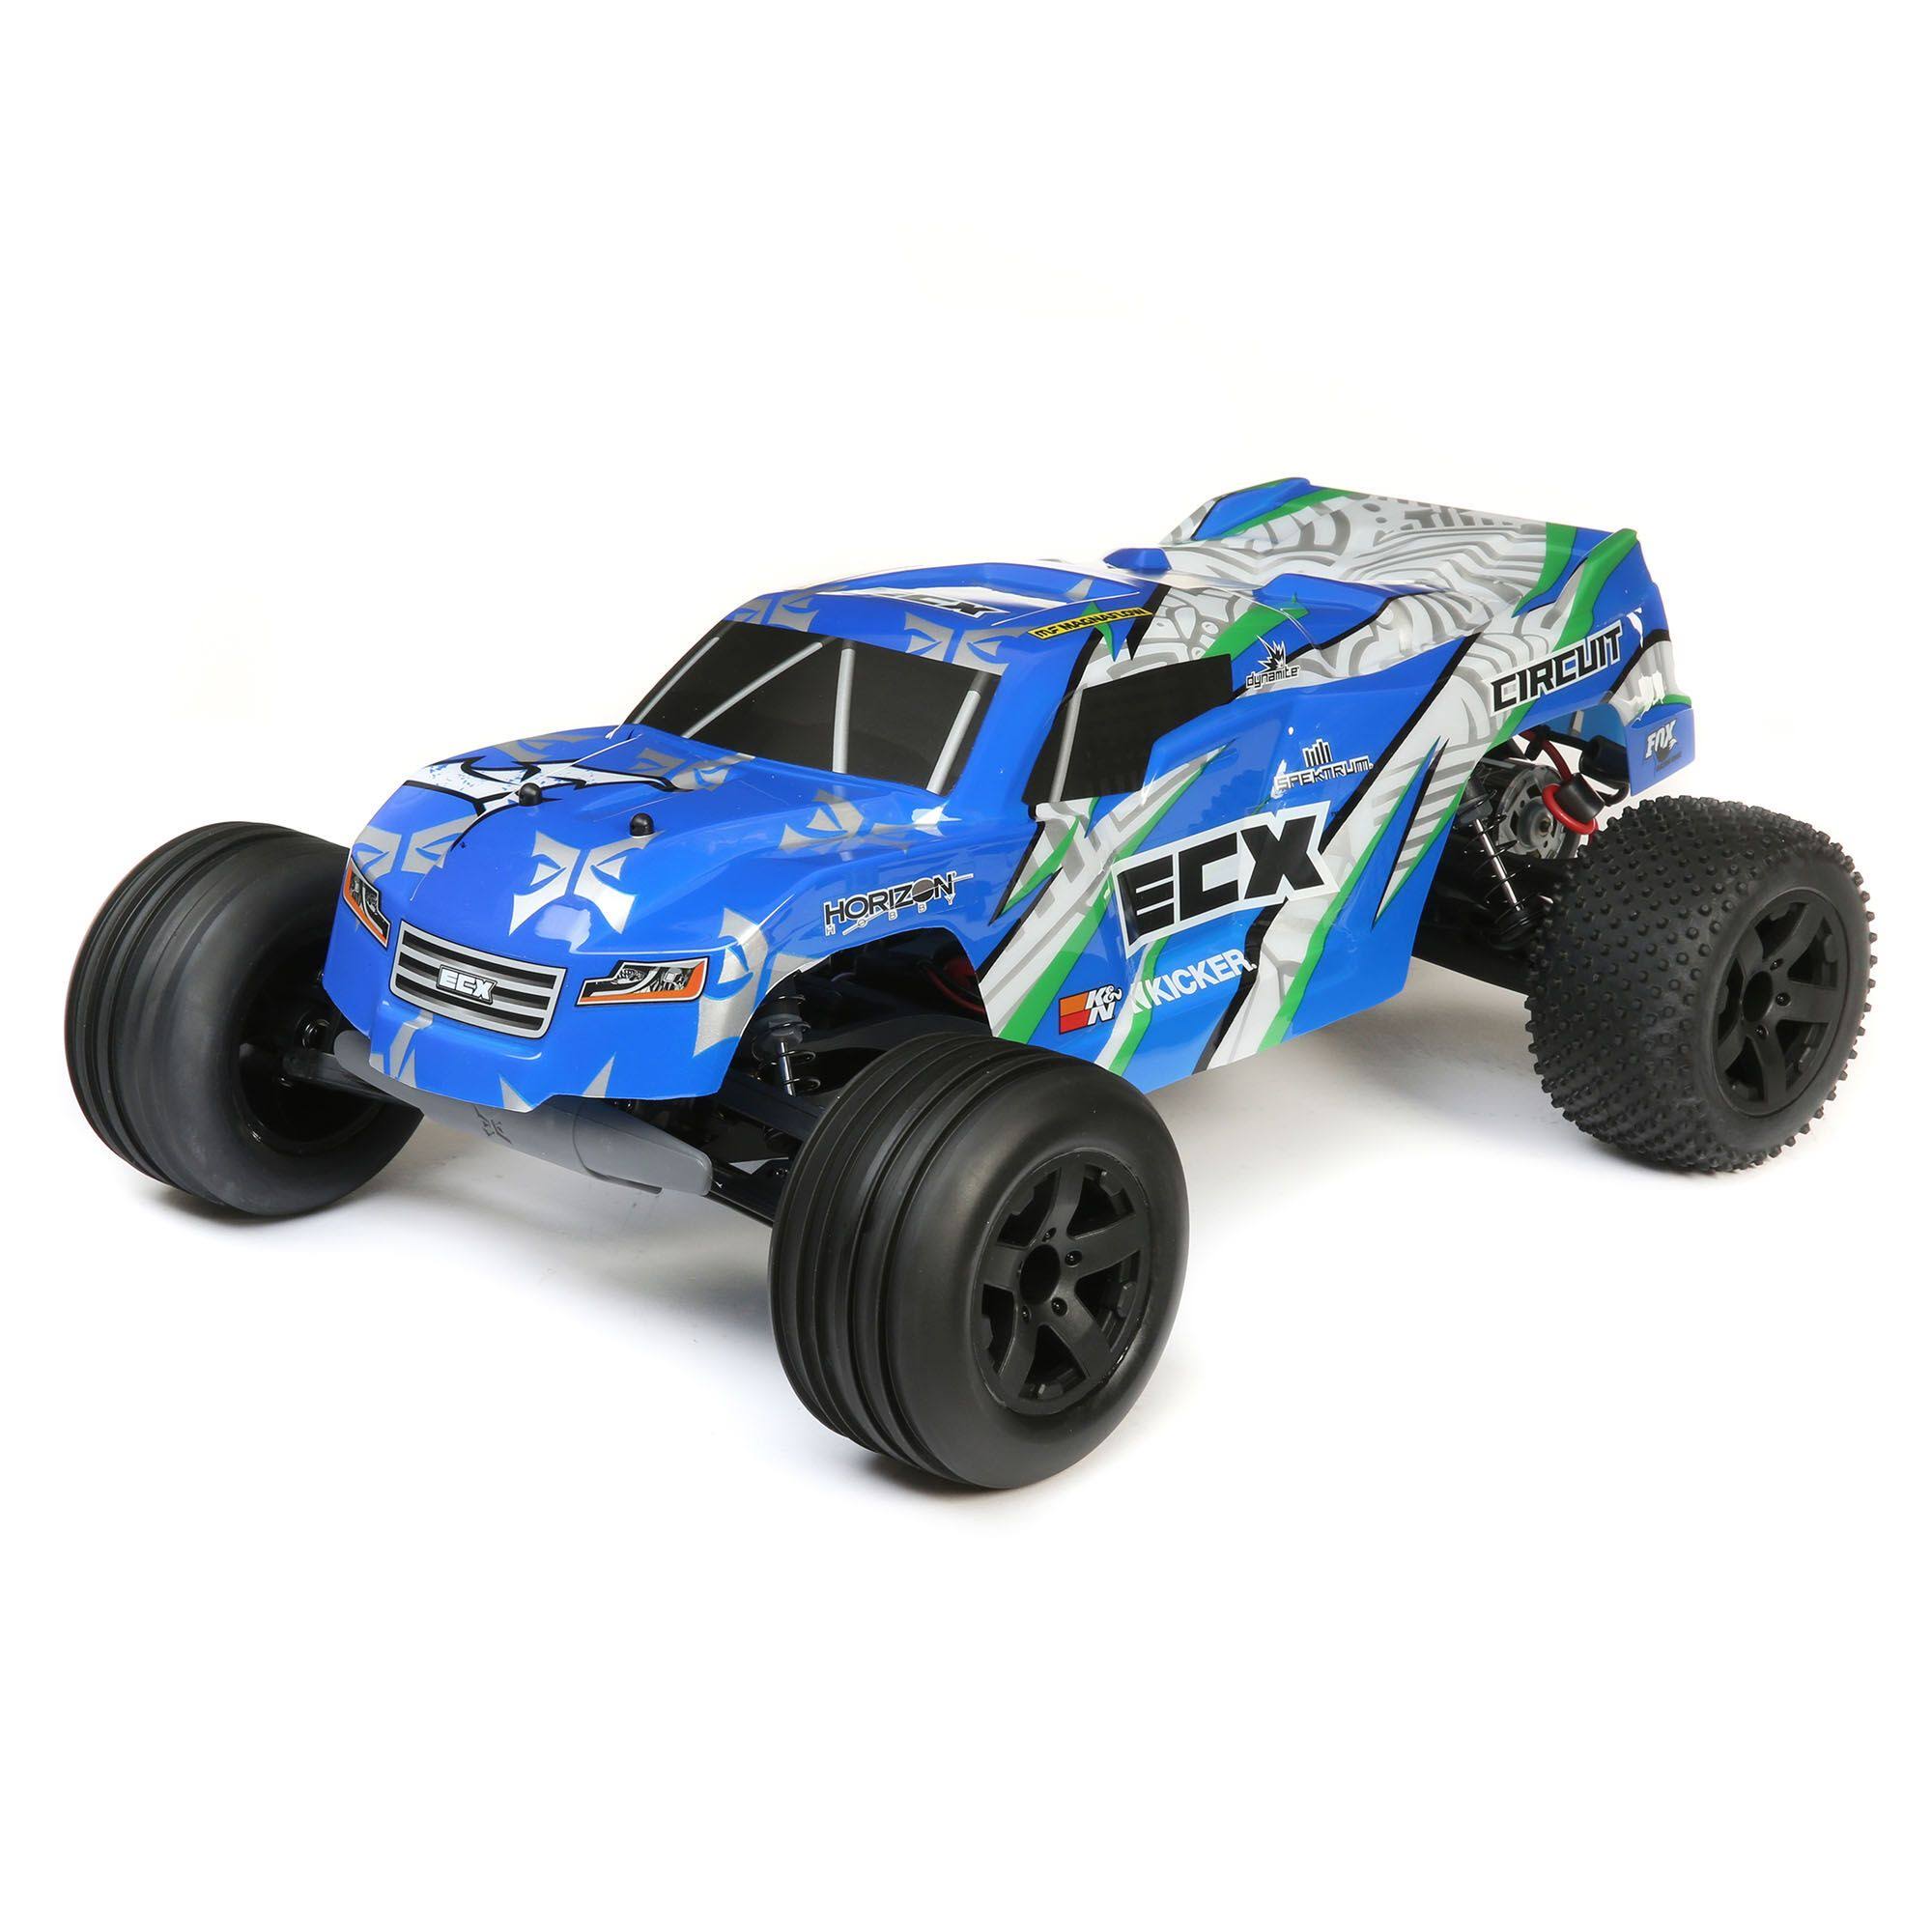 ECX Circuit 2WD Stadium Brushed Ready To Run Truck - Blue and White, Scale 1:10